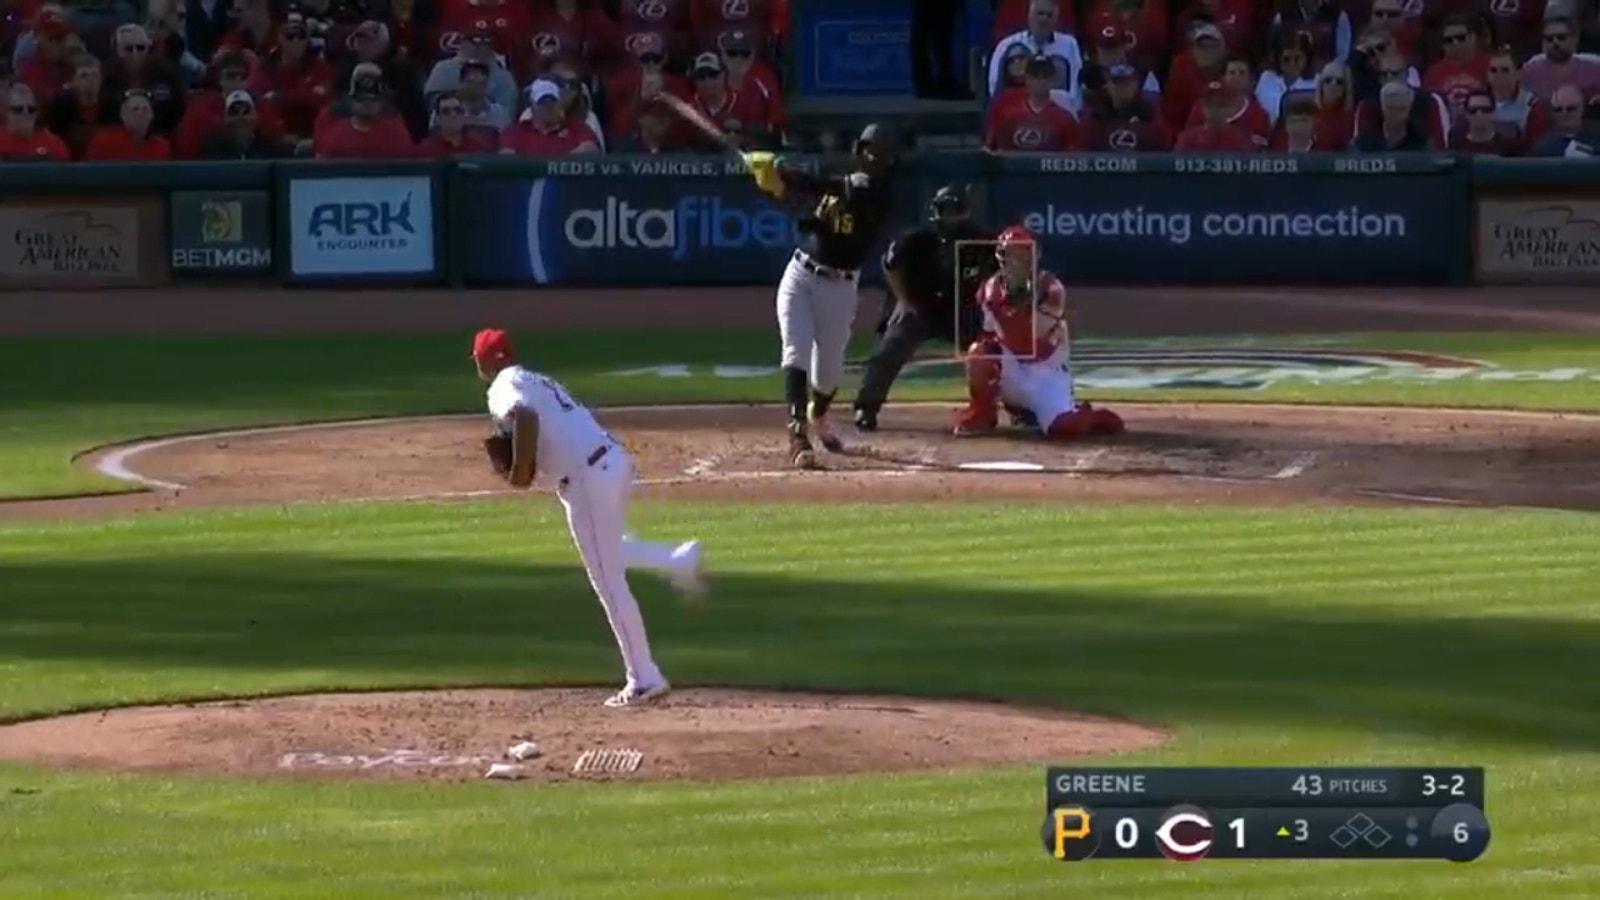 Pirates' Oneil Cruz smashes a home run off Reds' Hunter Greene with an exit velocity at 111 MPH